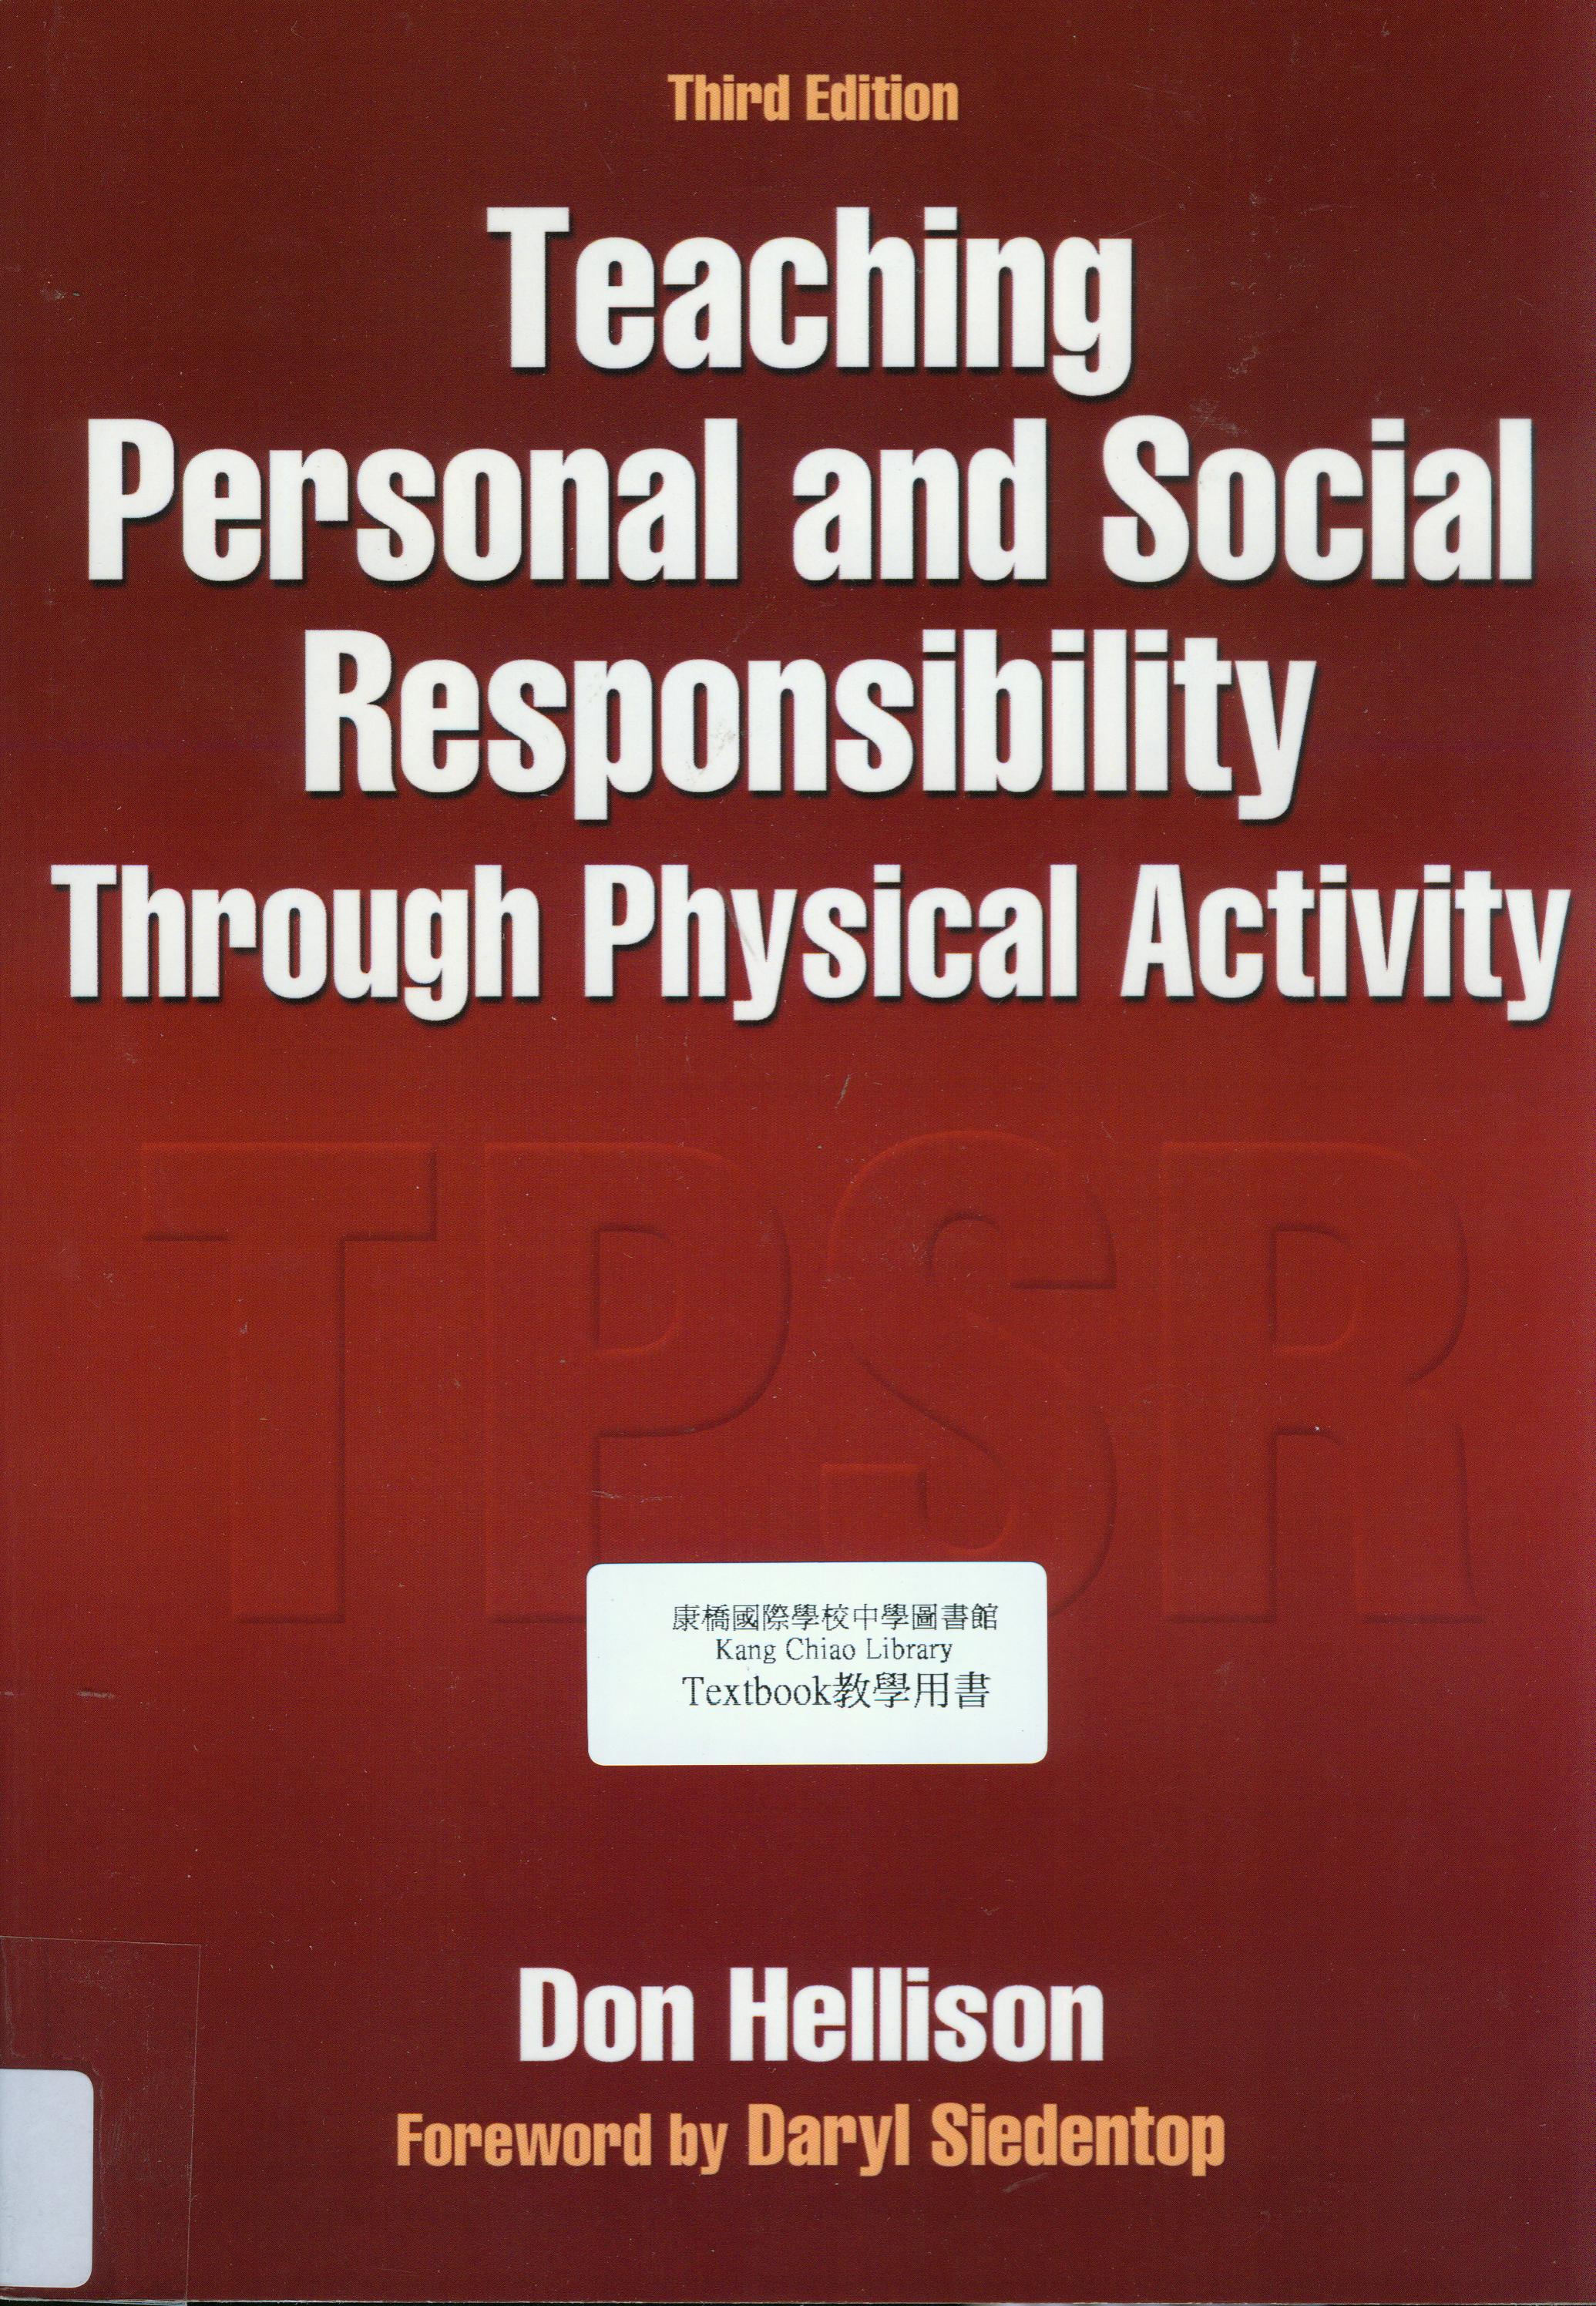 Teaching personal and social responsibility through physical activity